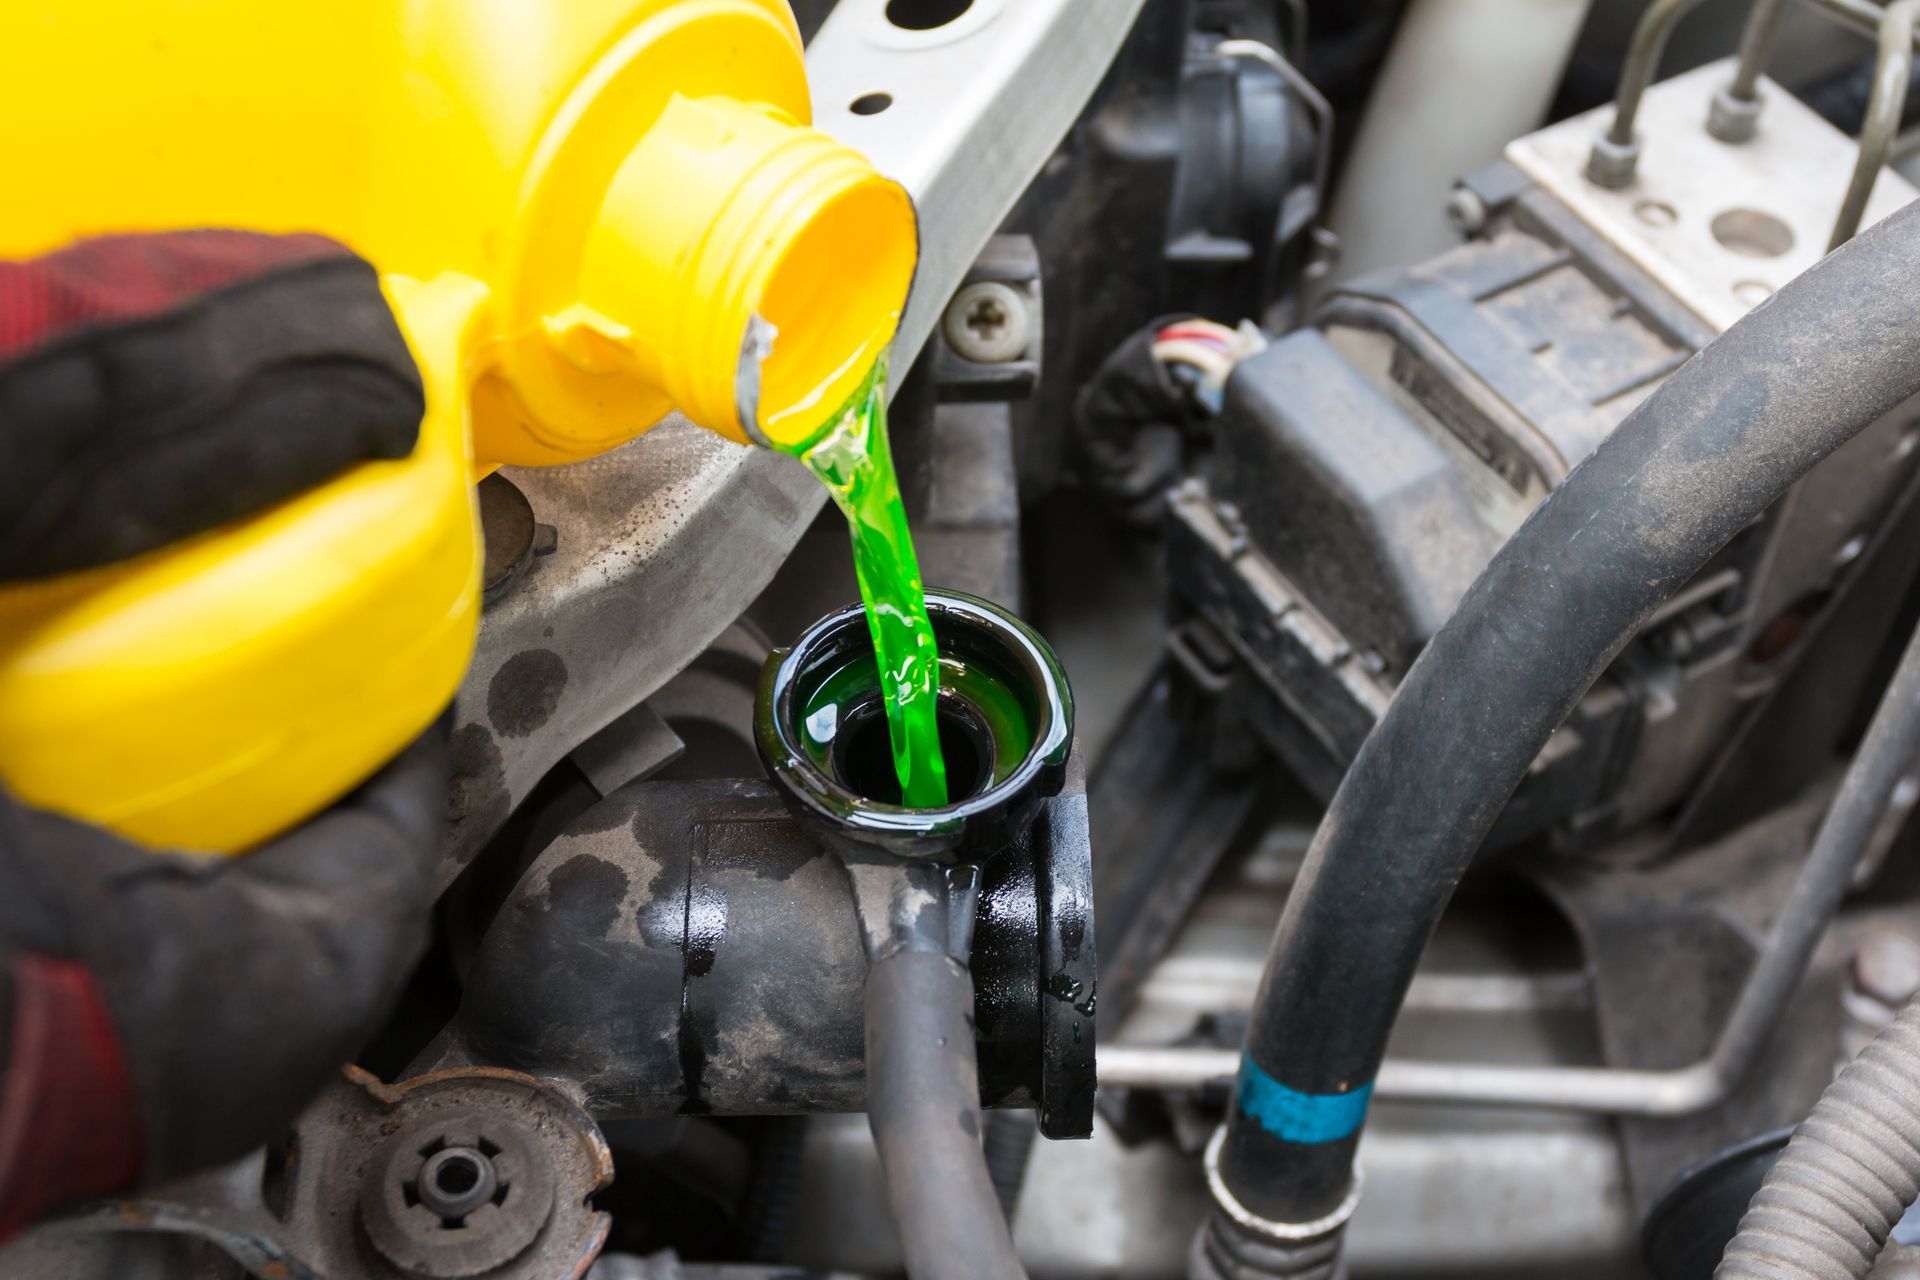 Coolant & Antifreeze at ﻿Future Tire and Automotive﻿ in ﻿Holbrook, Lakeside, Pinetop, and Show Low, AZ﻿